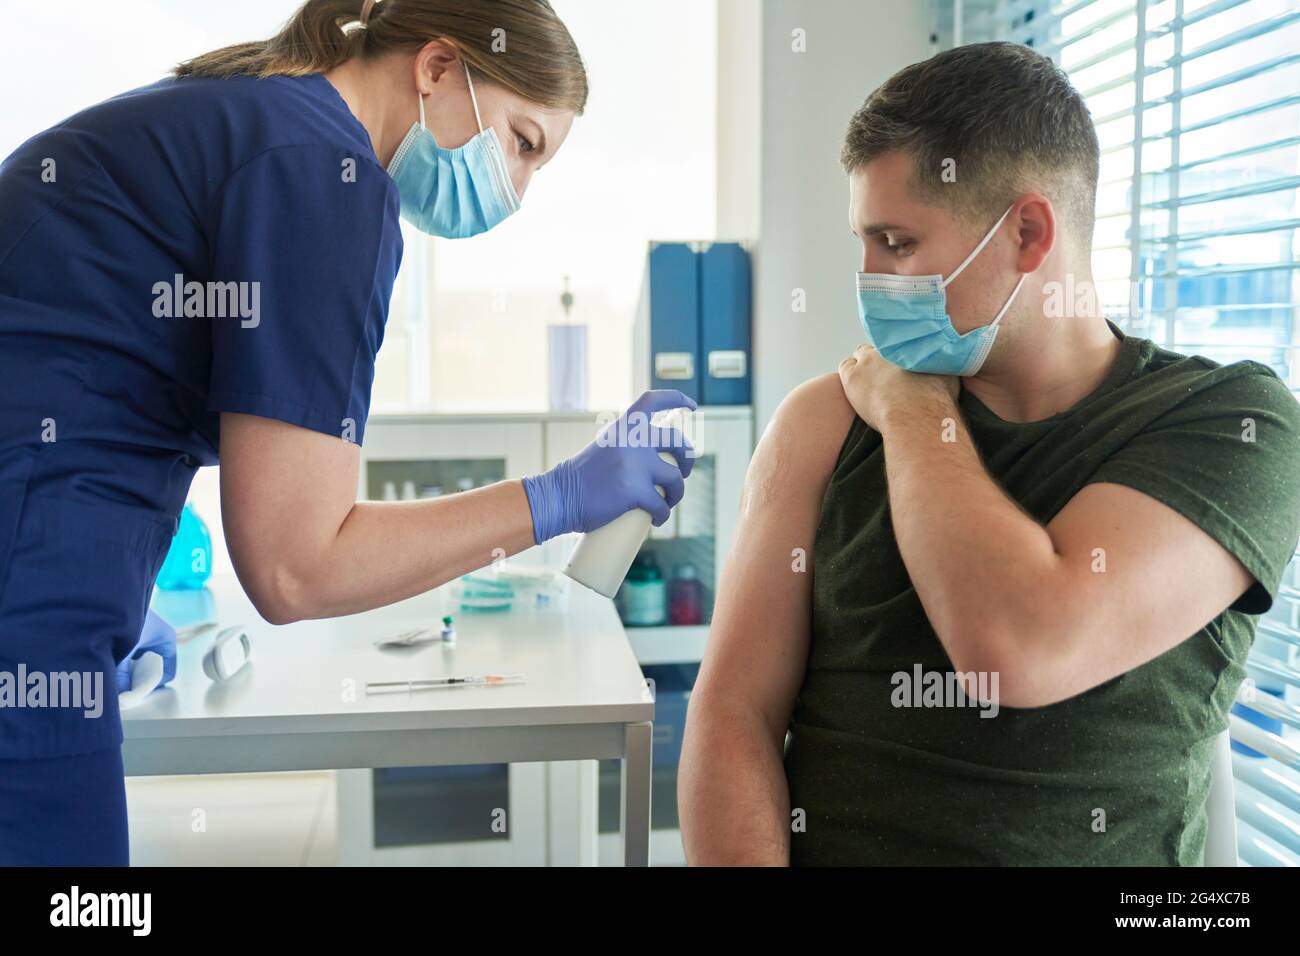 Female doctor spraying disinfectant on arm of male patient before giving COVID-19 vaccine at clinic Stock Photo